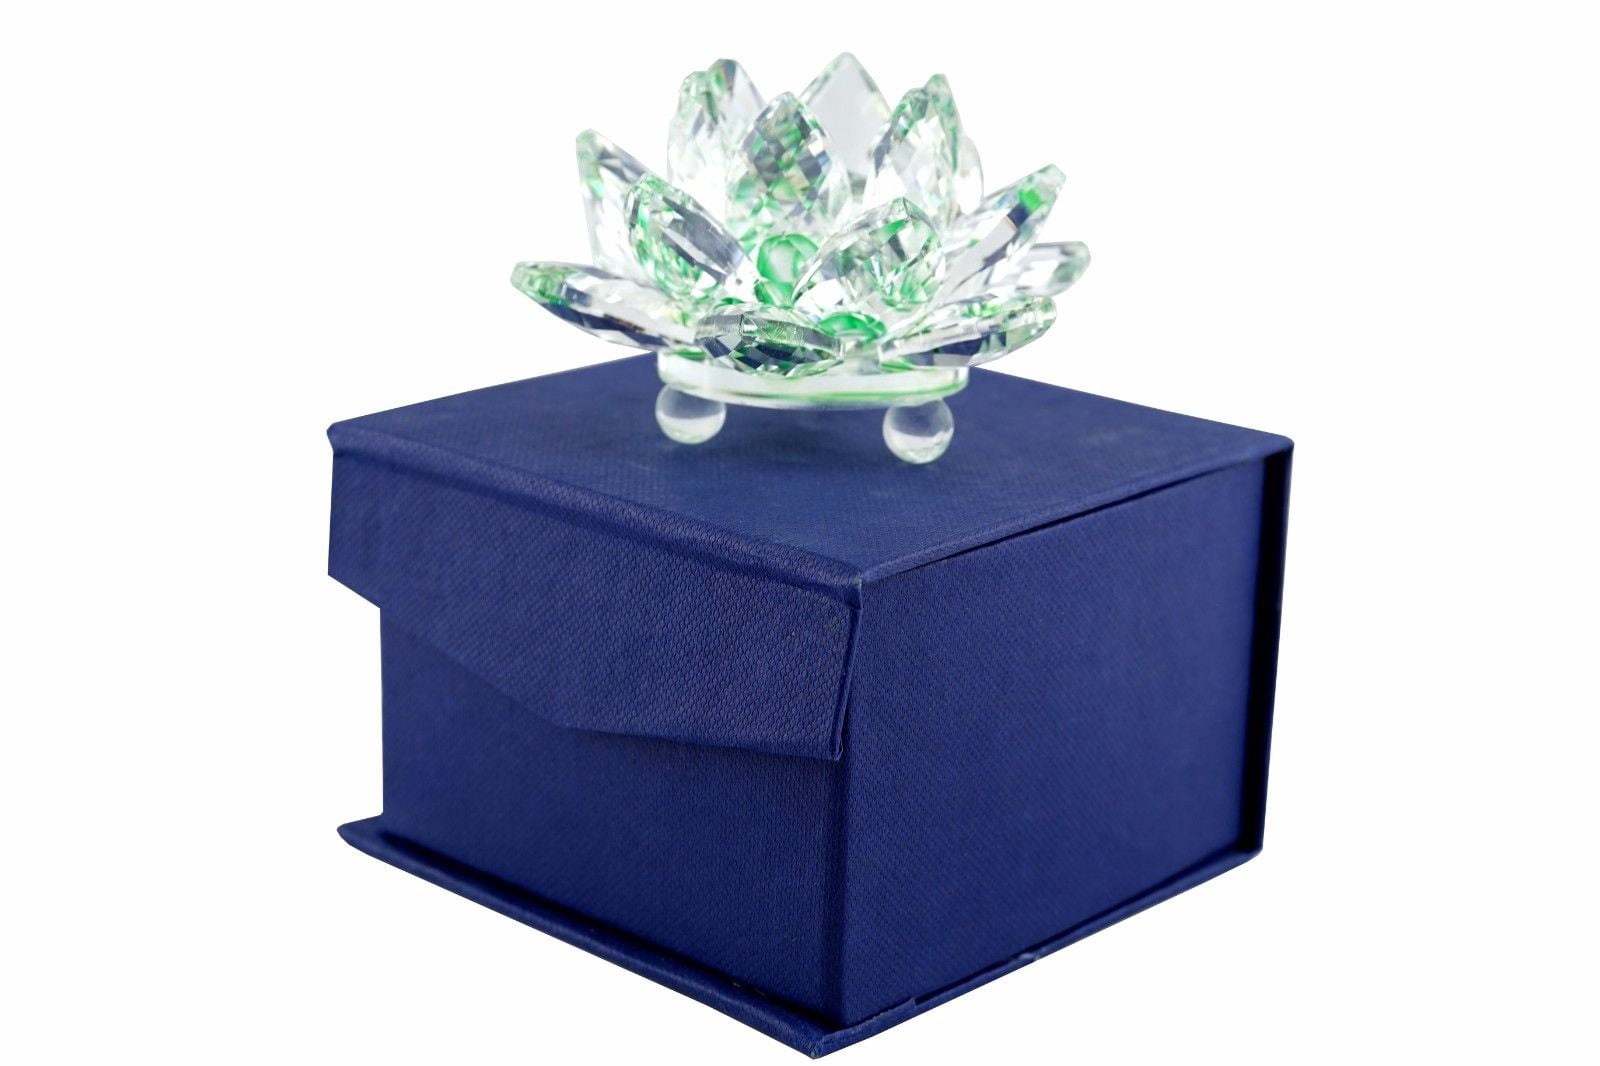 3" High Quality Clear Crystal Lotus Flower with Gift Box USA Seller 